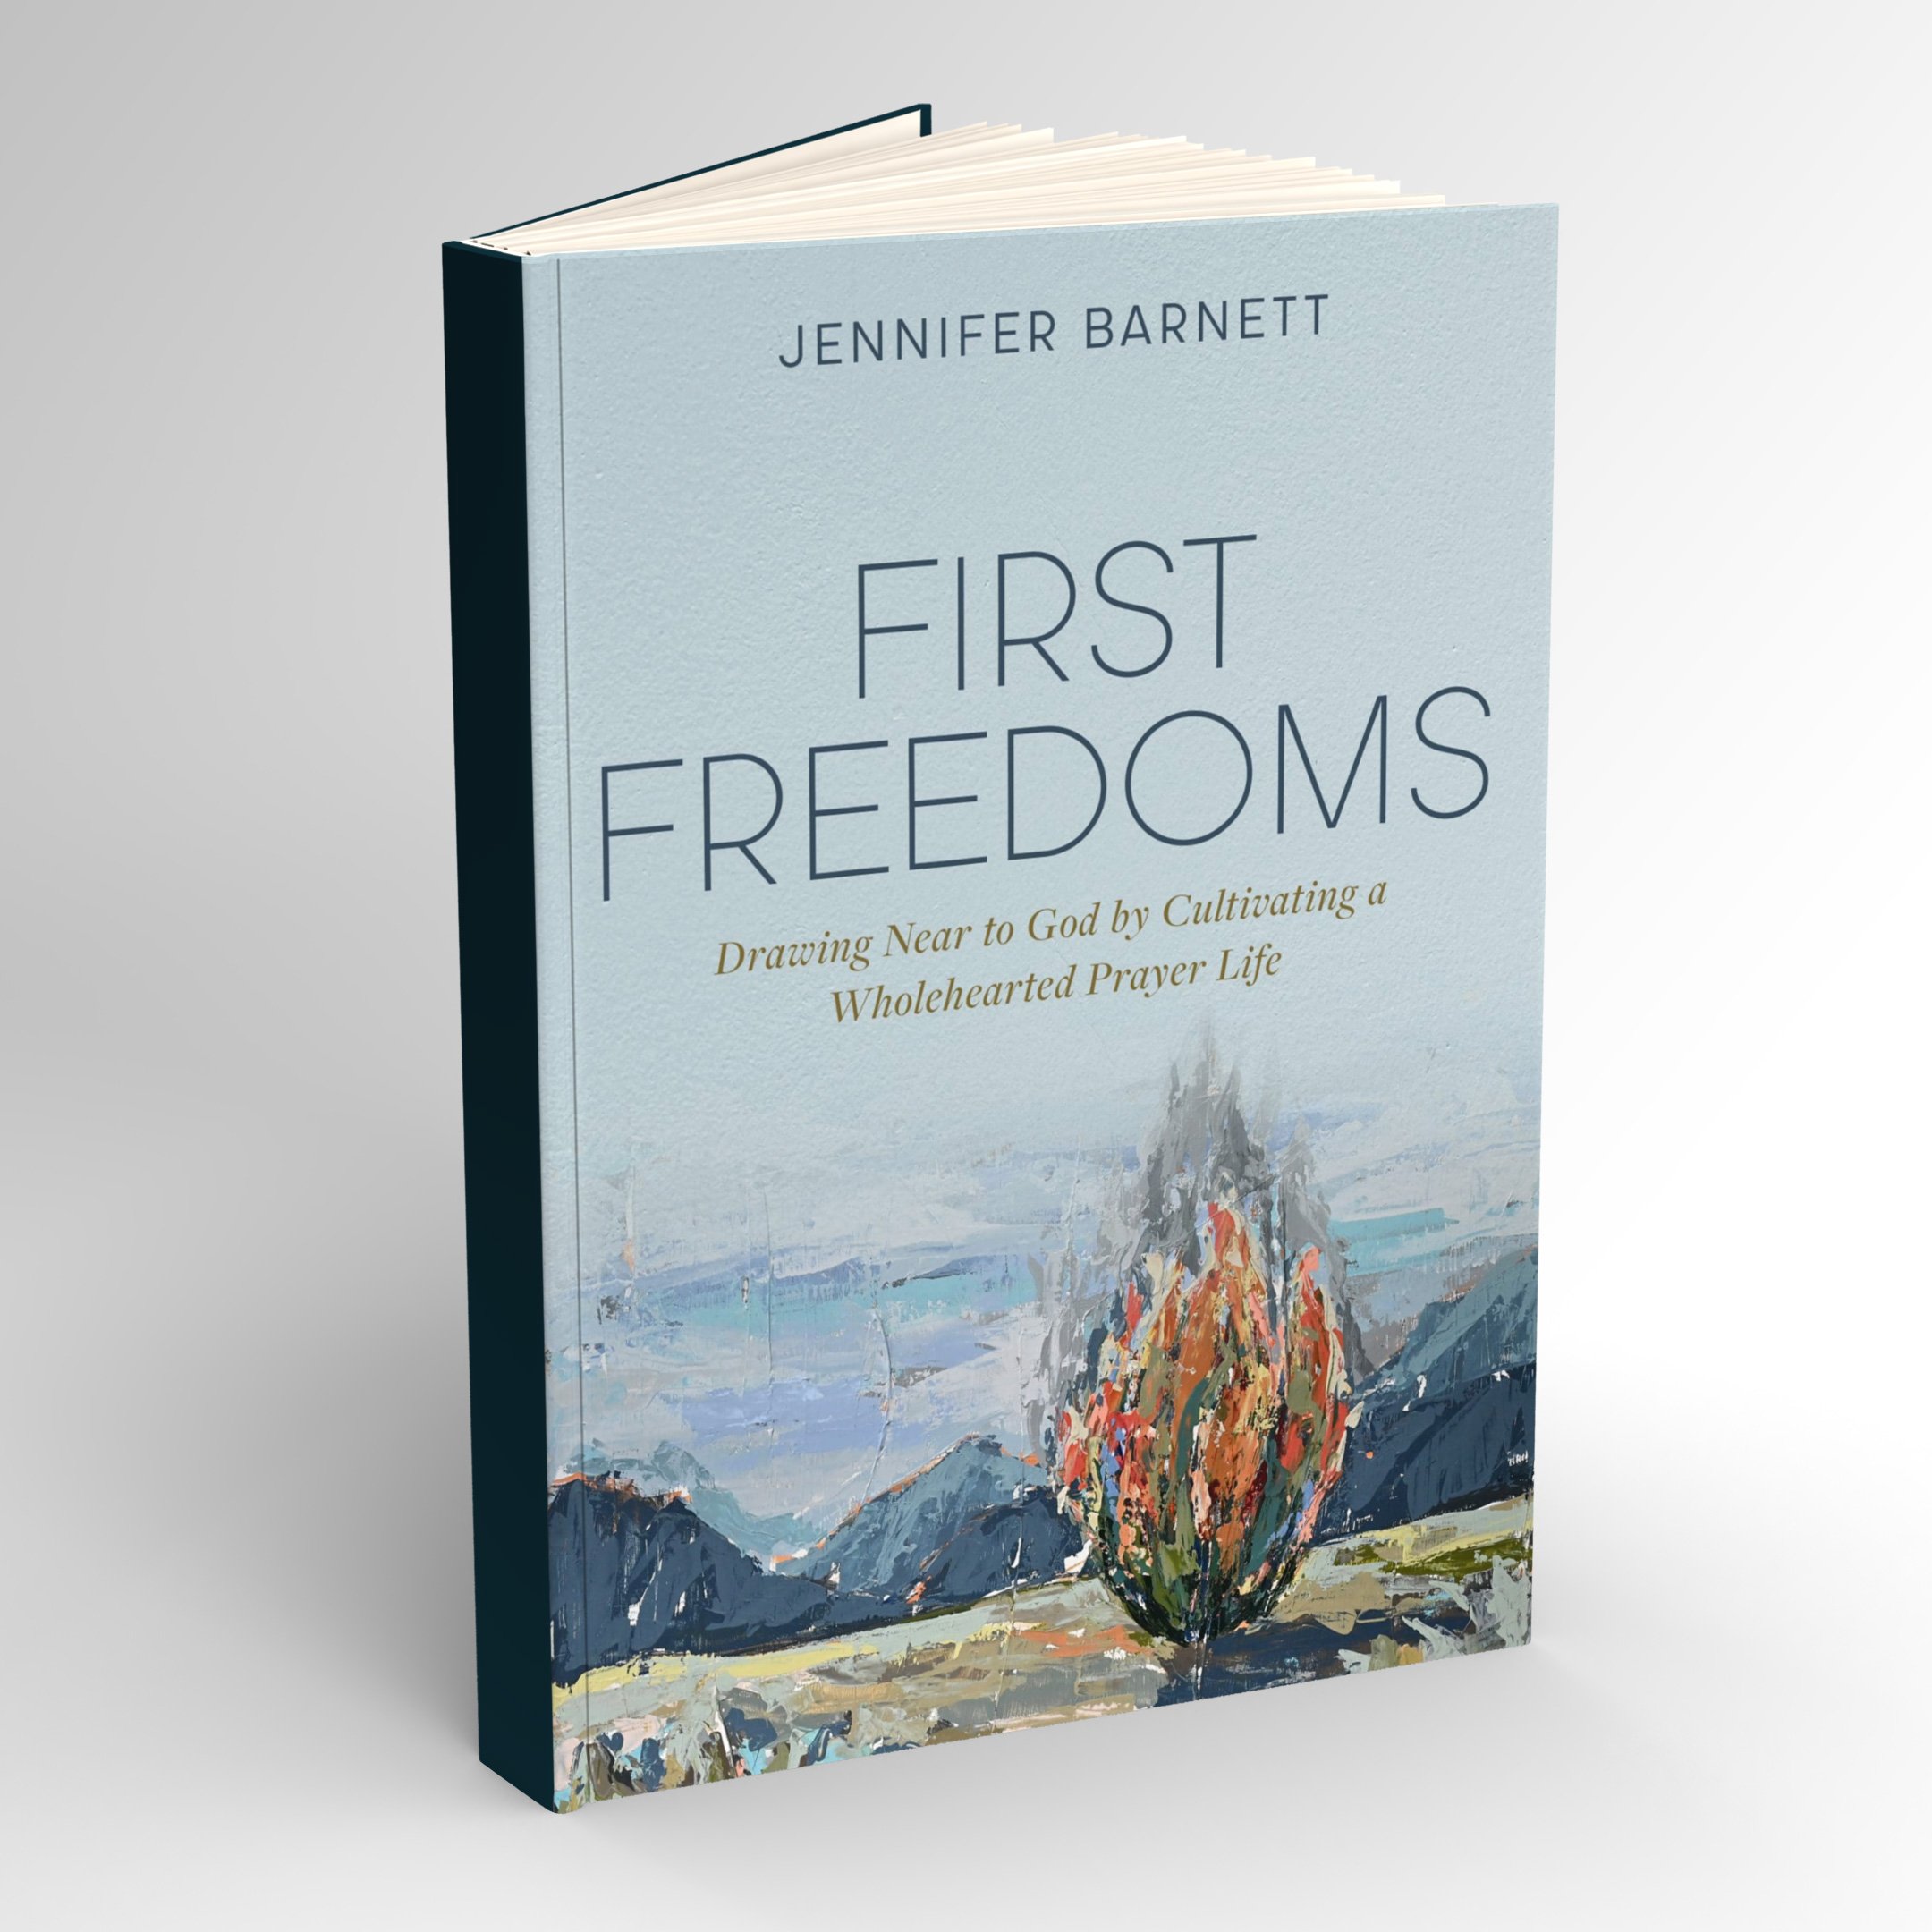 fp_first_freedoms_book_cover.jpg